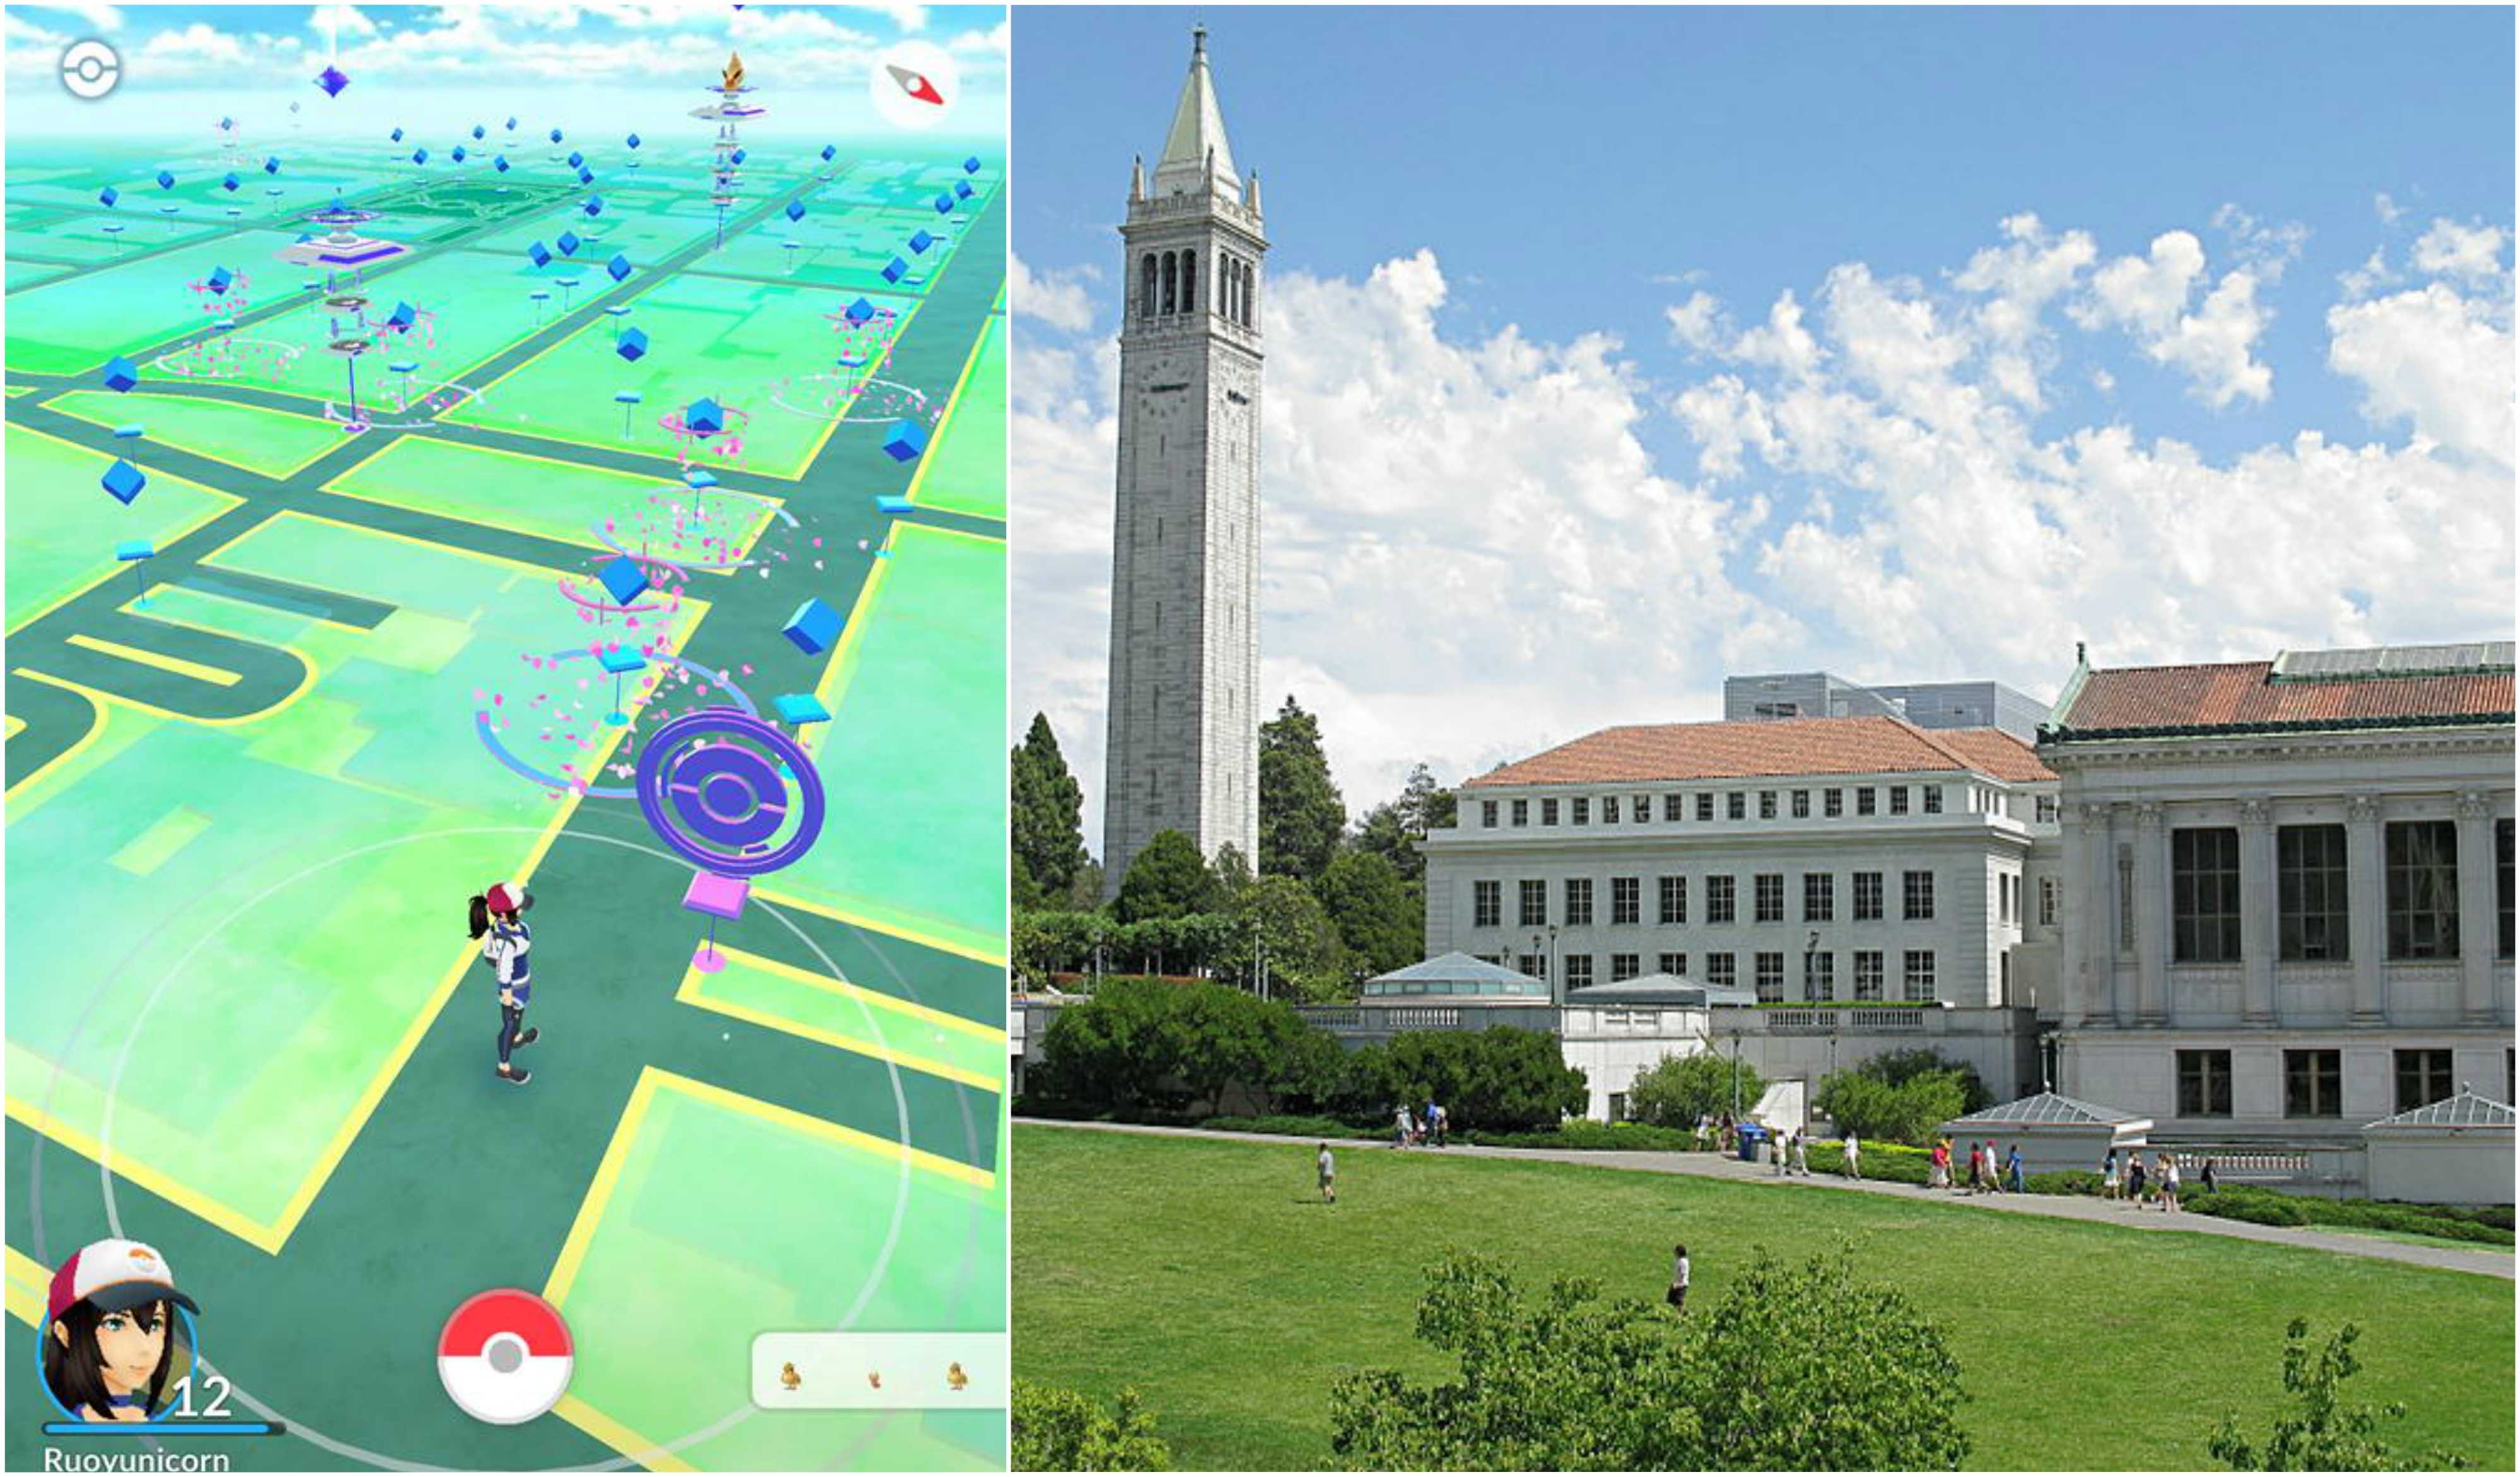 Senior Ruoyun Zheng played Pokemon Go in between breaks at her internship at Berkeley. Berkeley’s Sather Tower is a poke stop many players frequent. First photo used with permission by Ruoyun Zheng. “Creative commons UC Berkeley Tower” John Loo 